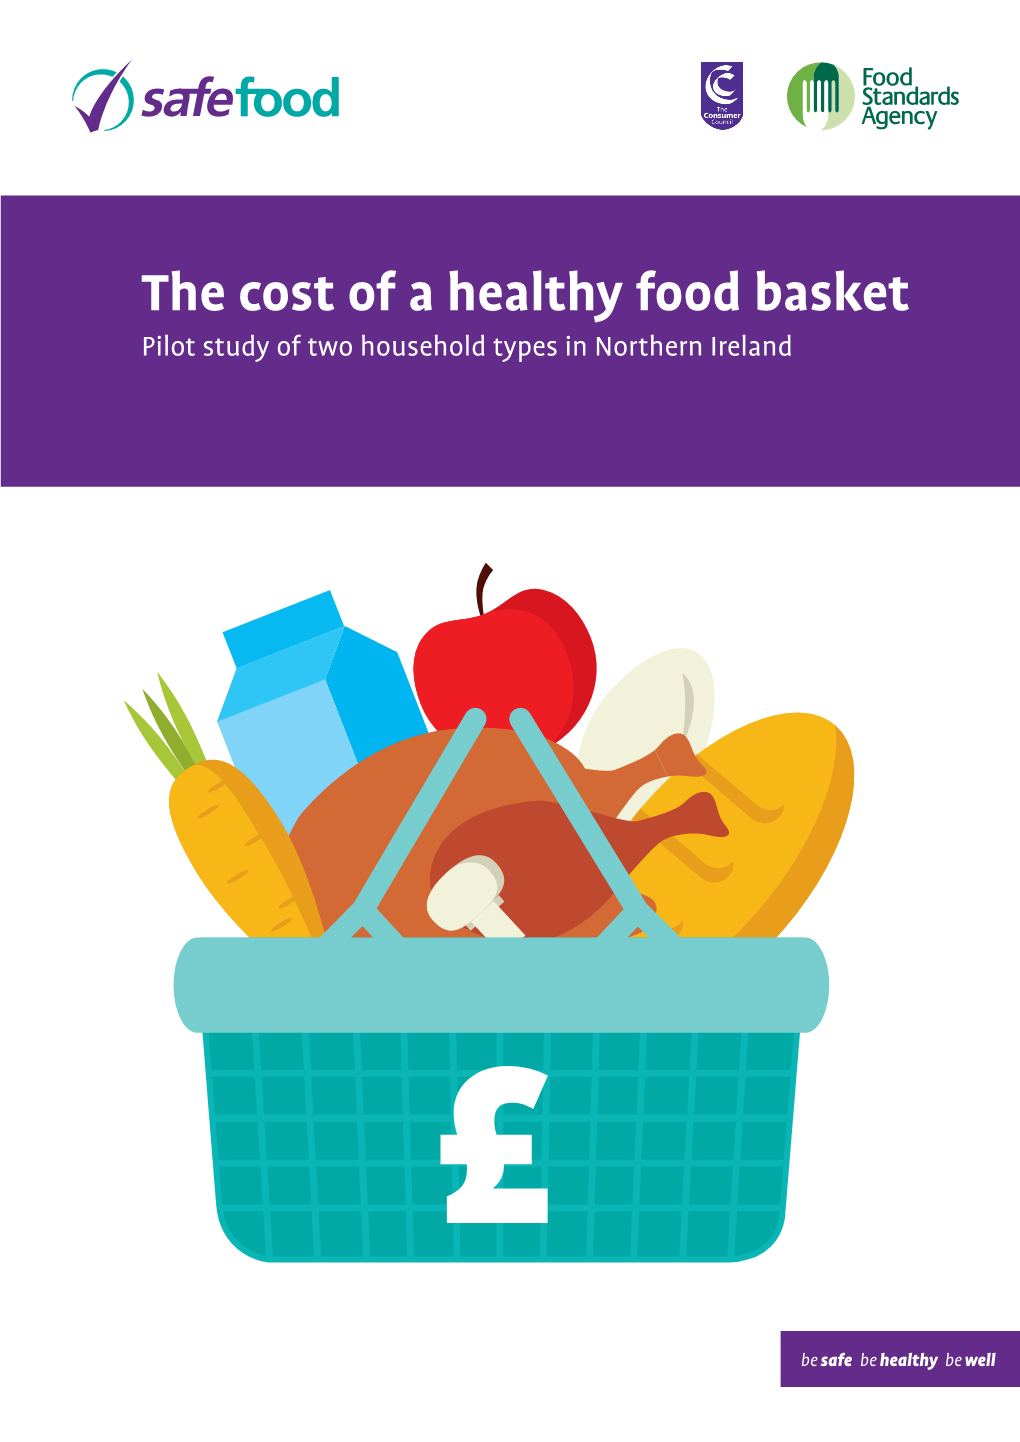 The Cost of a Minimum Essential Food Basket in Northern Ireland. Pilot Study for Two Household Types